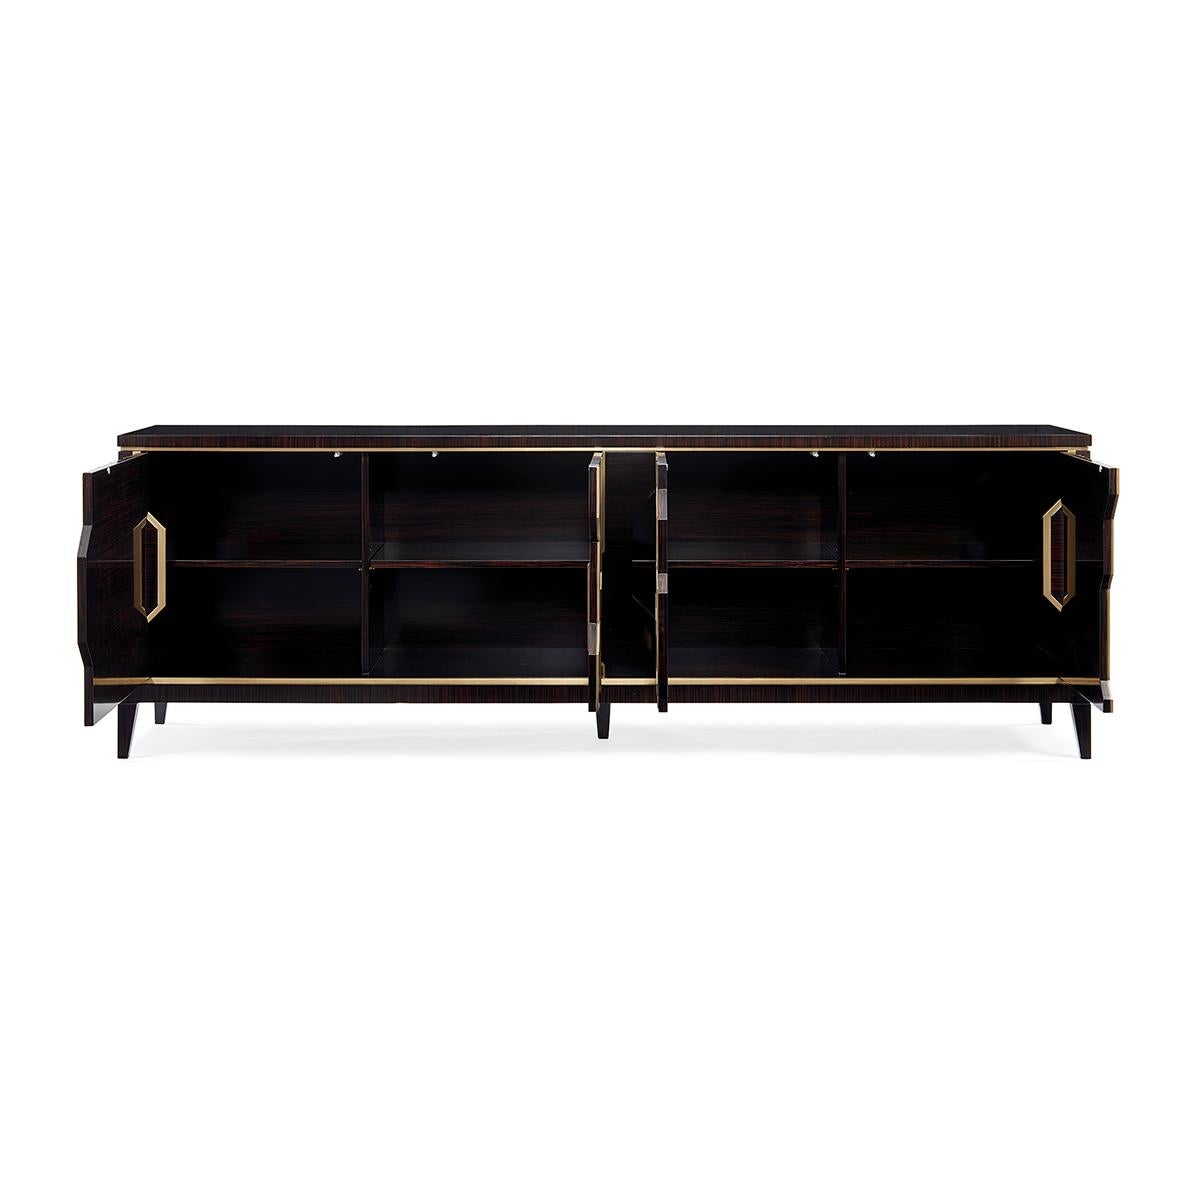 Asian Art Deco Inspired Long Credenza For Sale